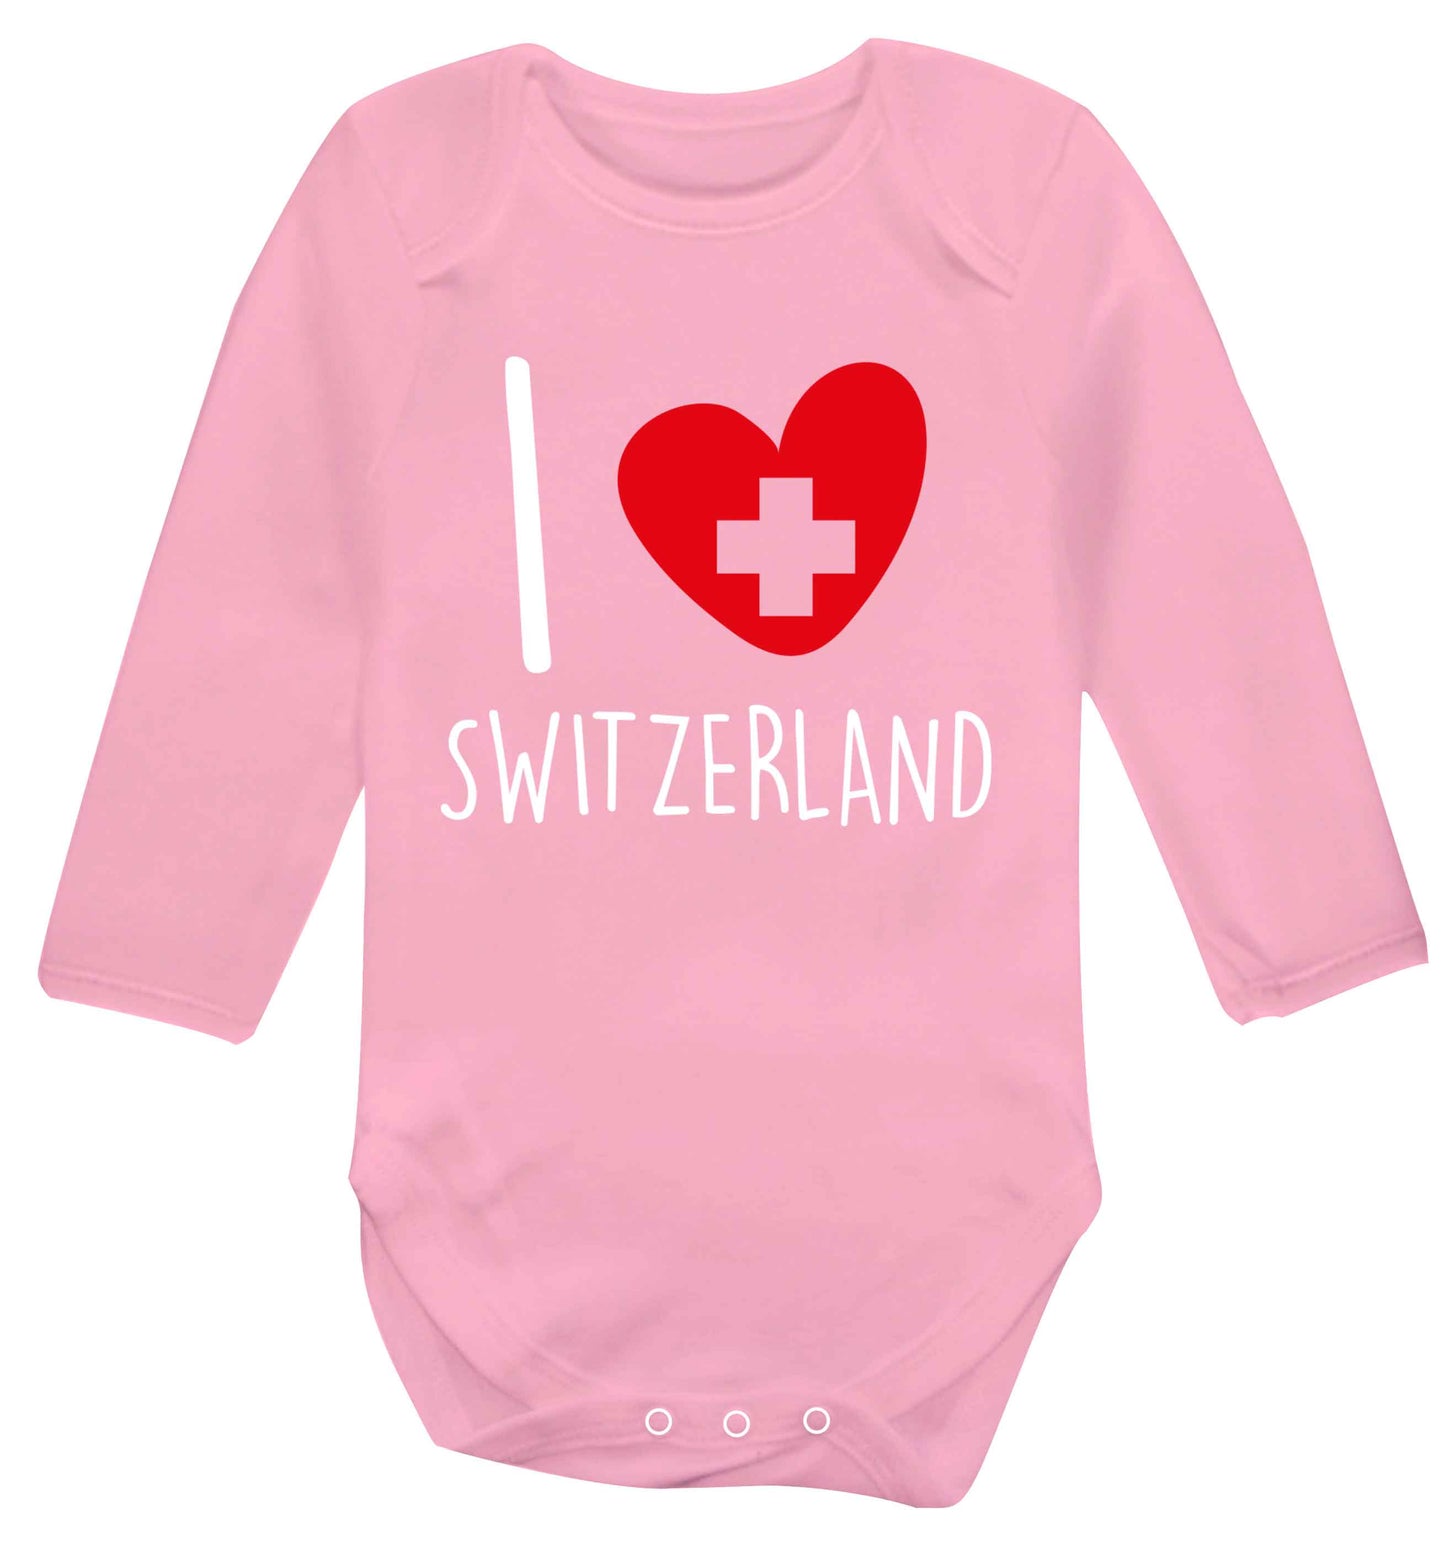 I love switzerland Baby Vest long sleeved pale pink 6-12 months